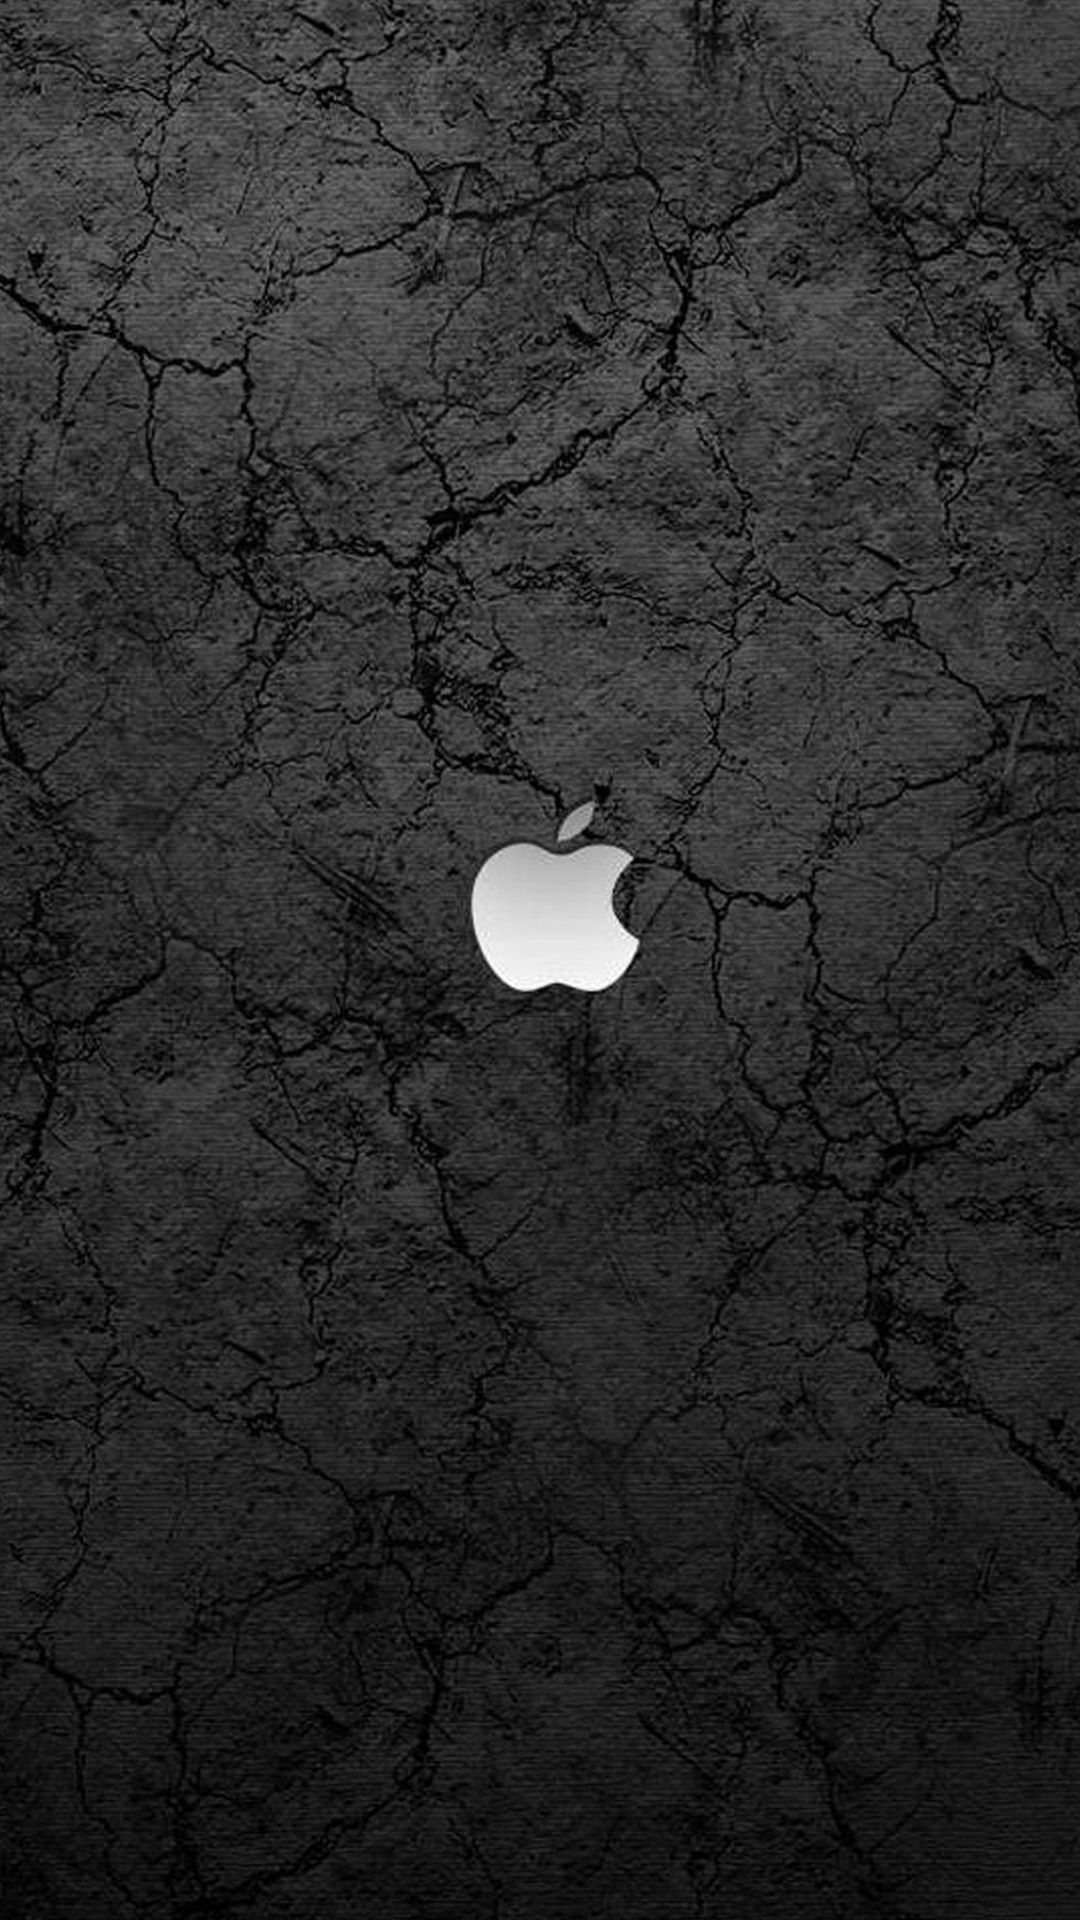 iPhone 6 Plus Wallpaper, 49 iPhone 6 Plus Background Collection. Black apple wallpaper, Black and white wallpaper iphone, Apple wallpaper iphone